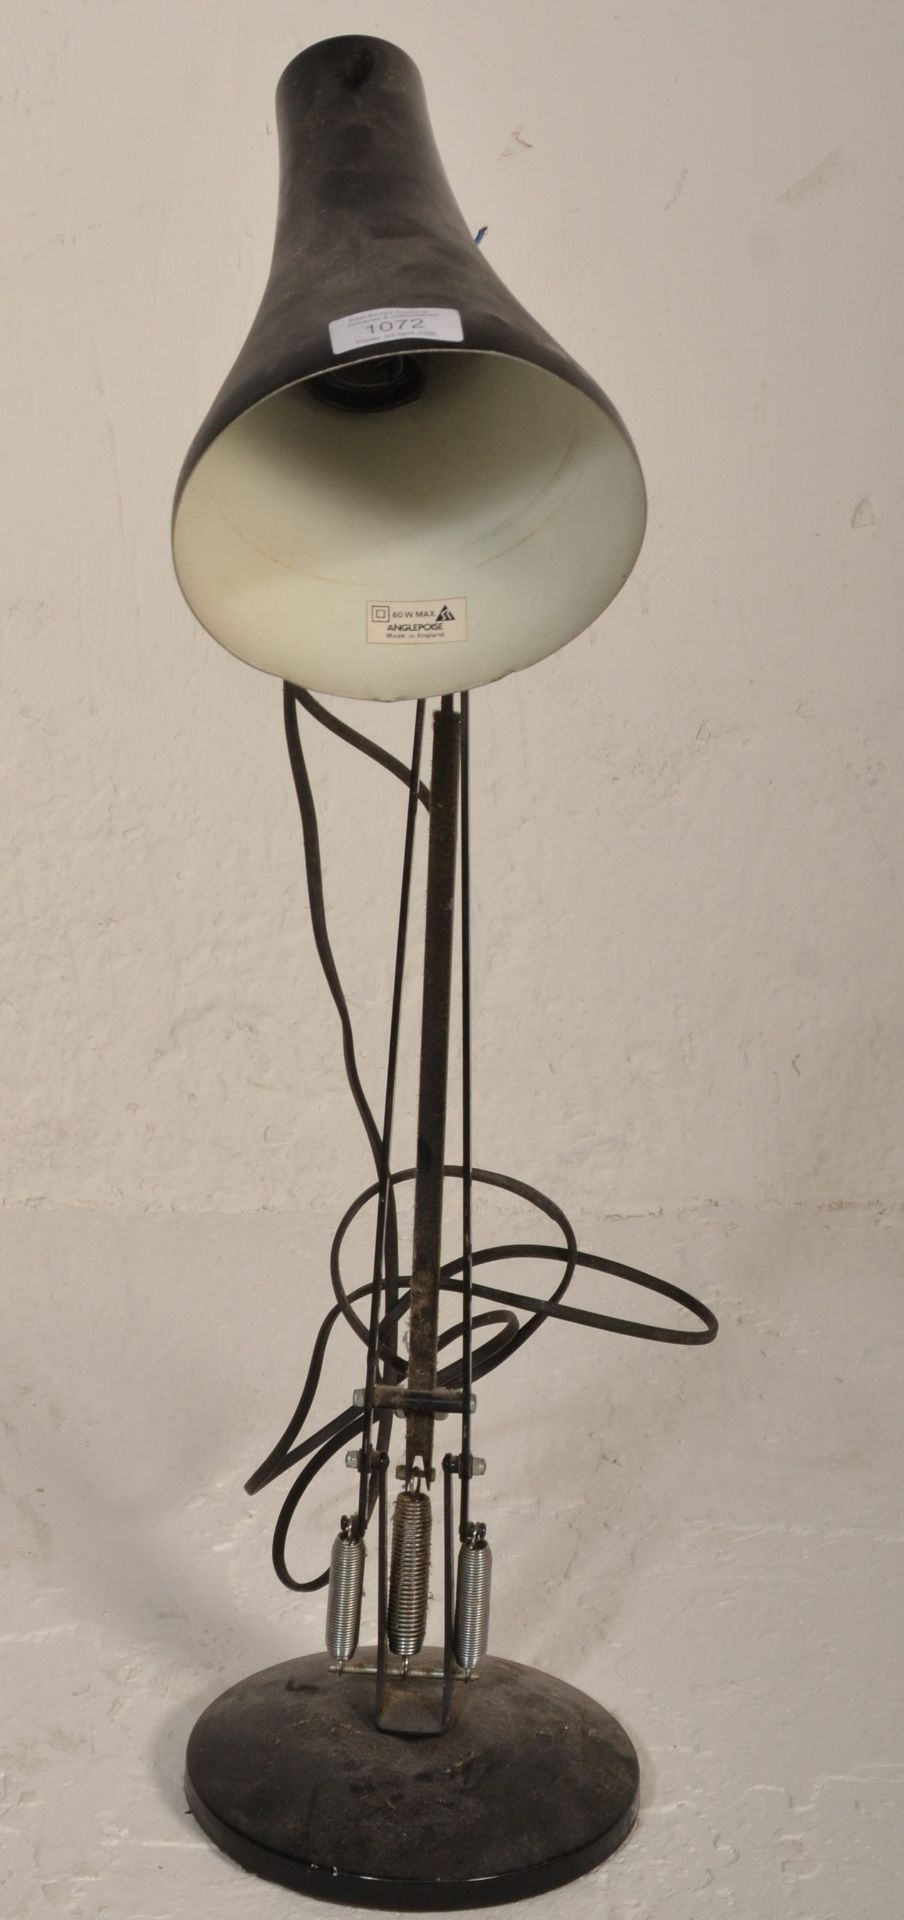 A vintage 20th Century Herbert Terry Anglepoise industrial desk lamp finished in black enamel - Bild 2 aus 4